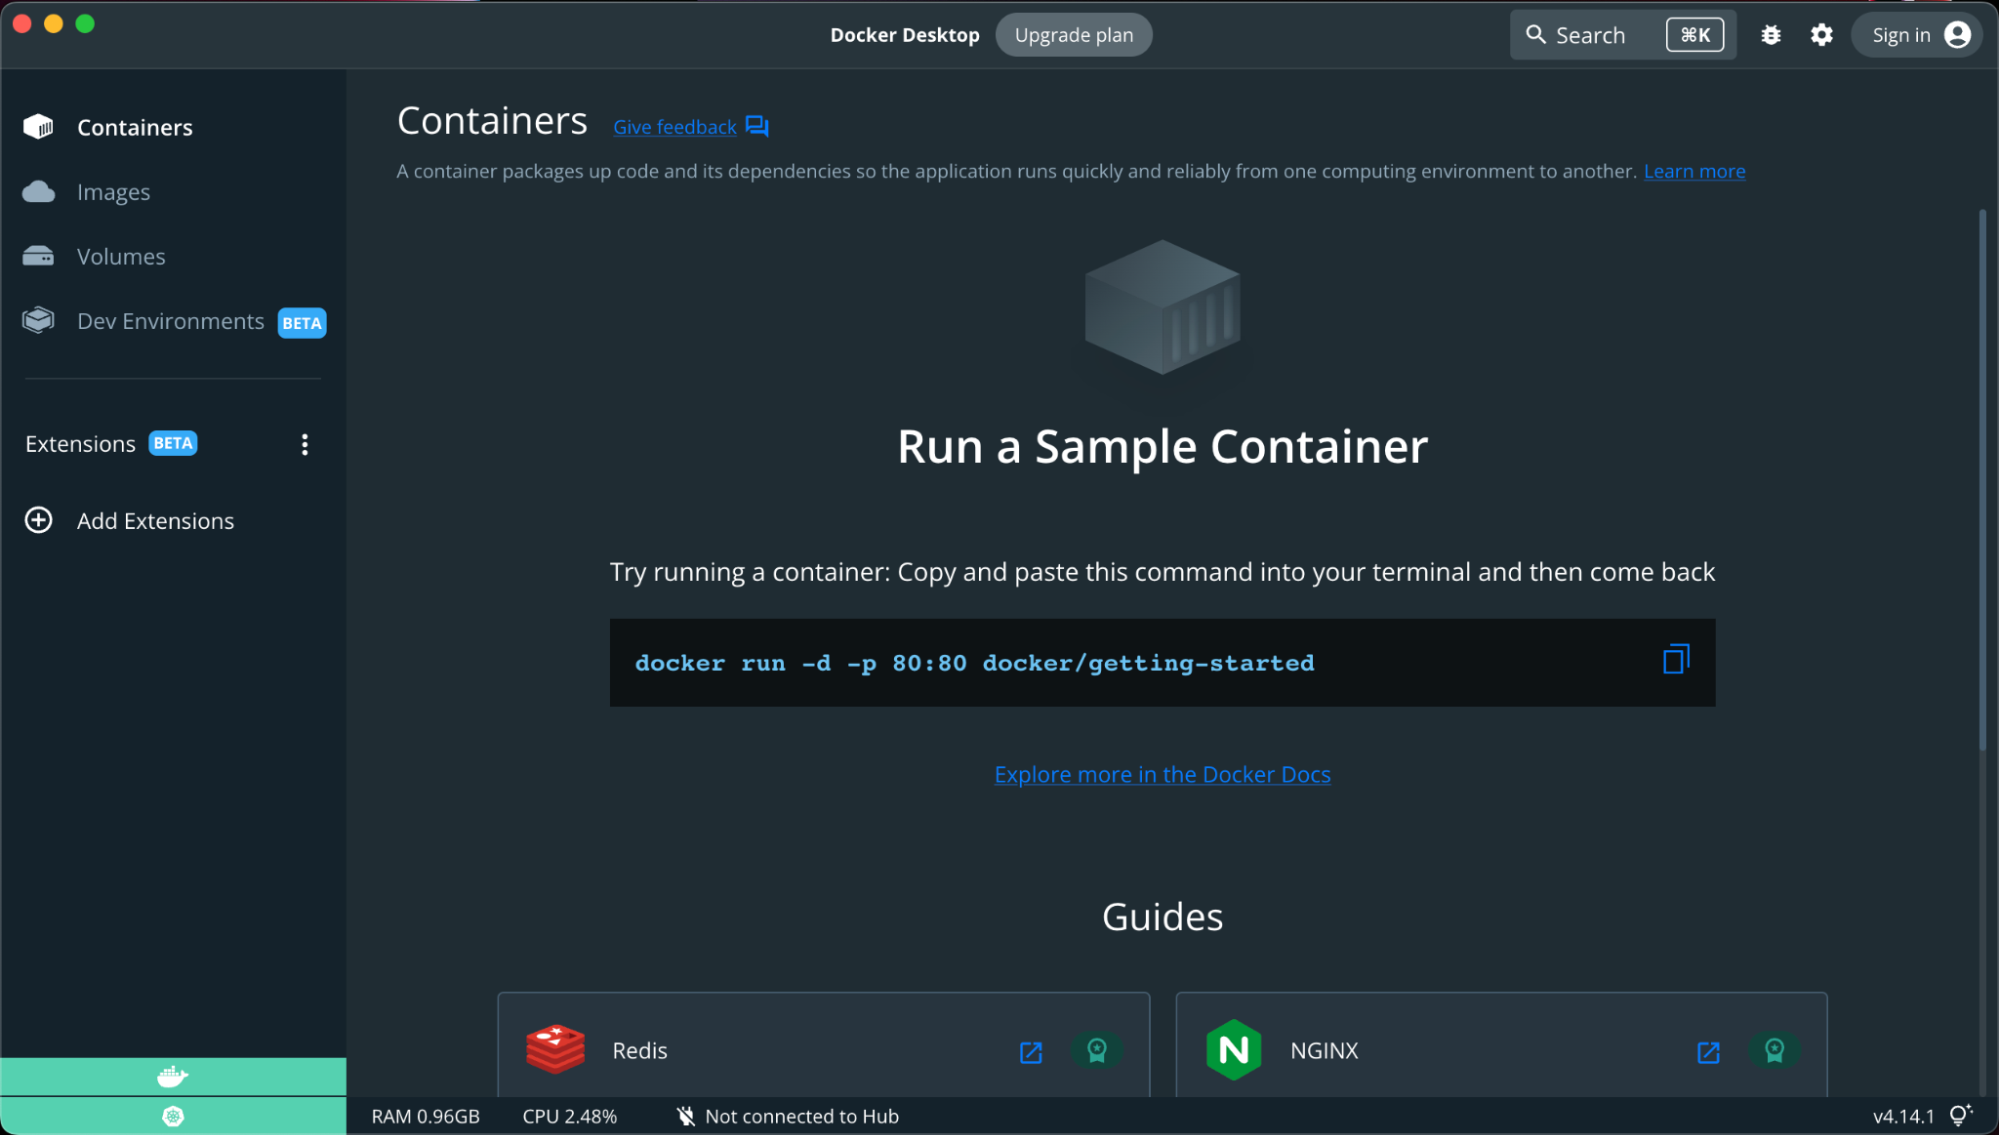 Select add extensions to add extensions to docker desktop.